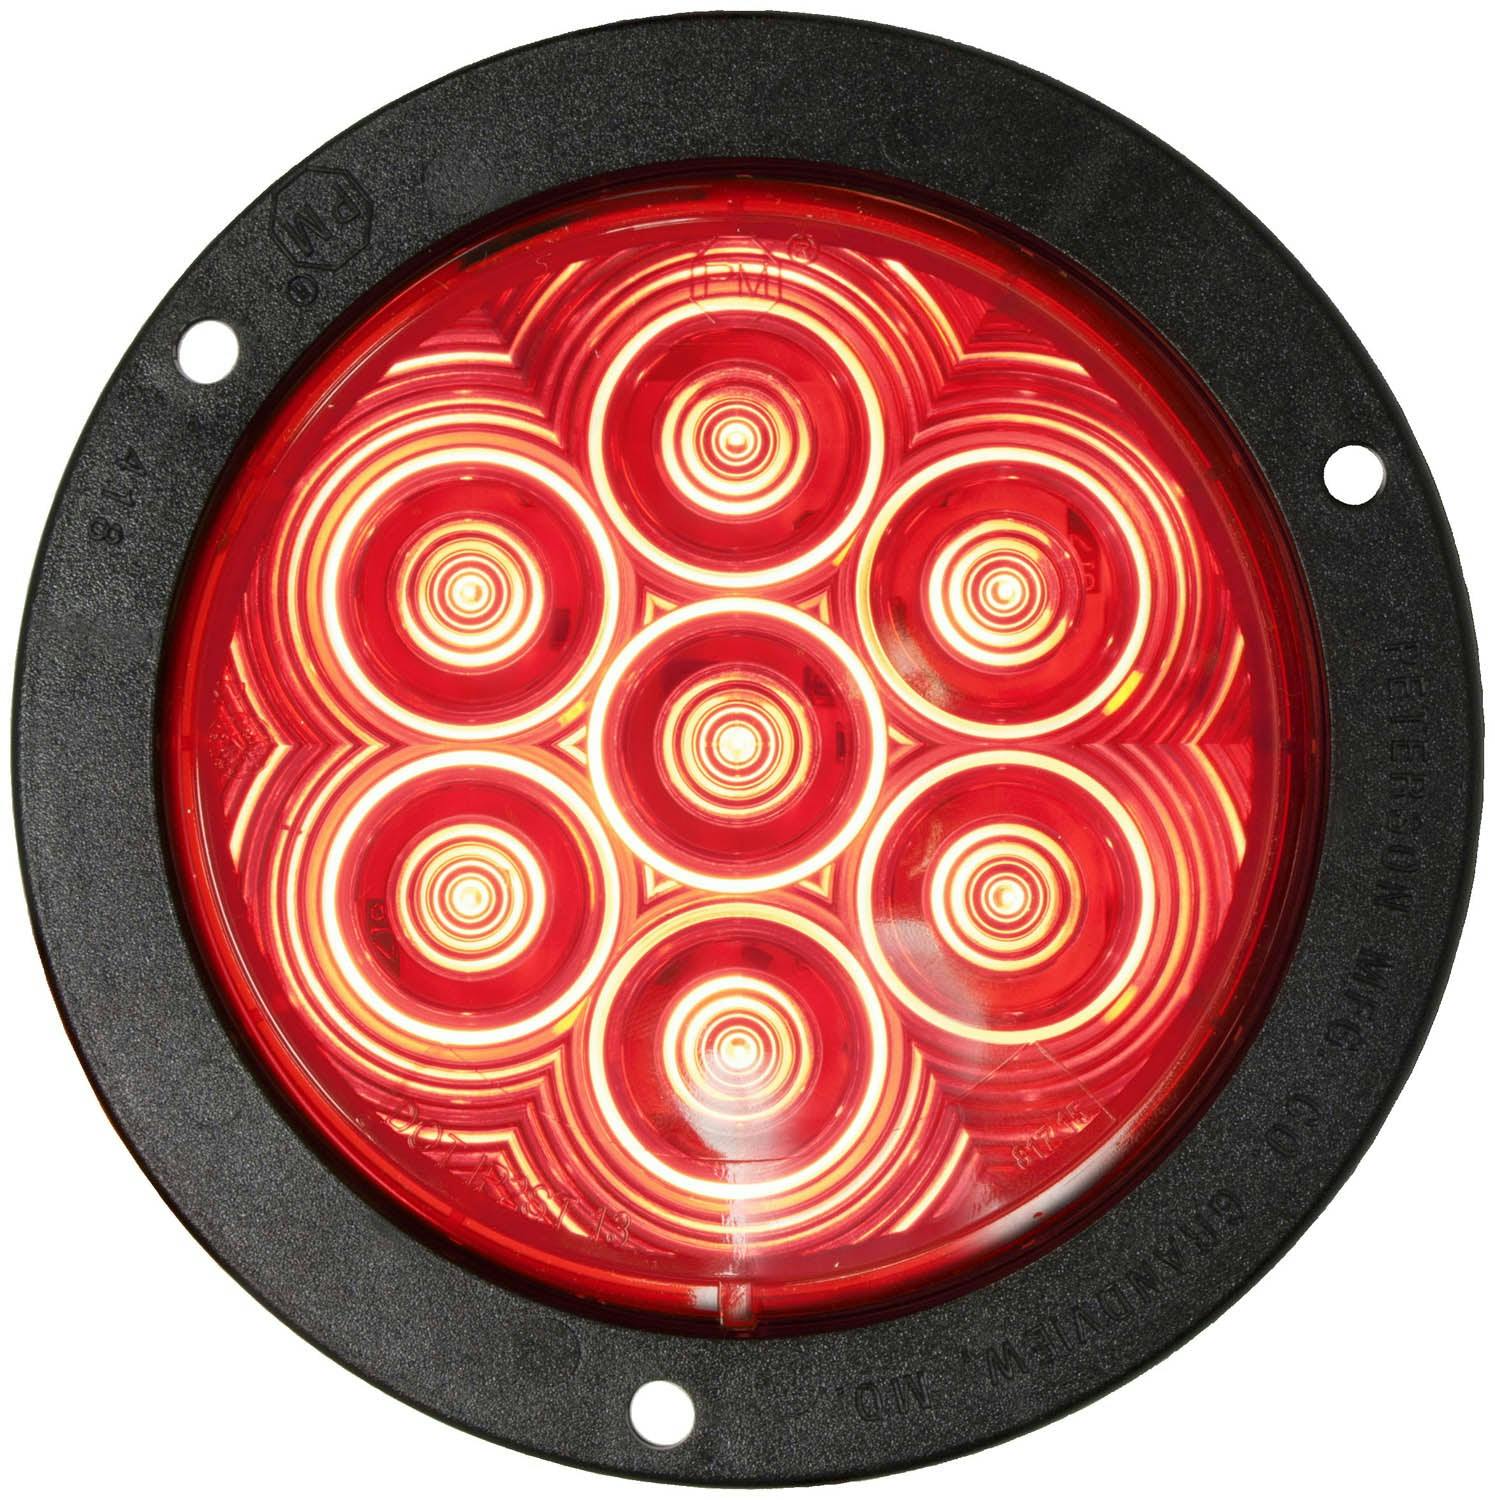 LED Stop/Turn/Tail, Round, Flange-Mount 4", red, bulk pack (Pack of 50)